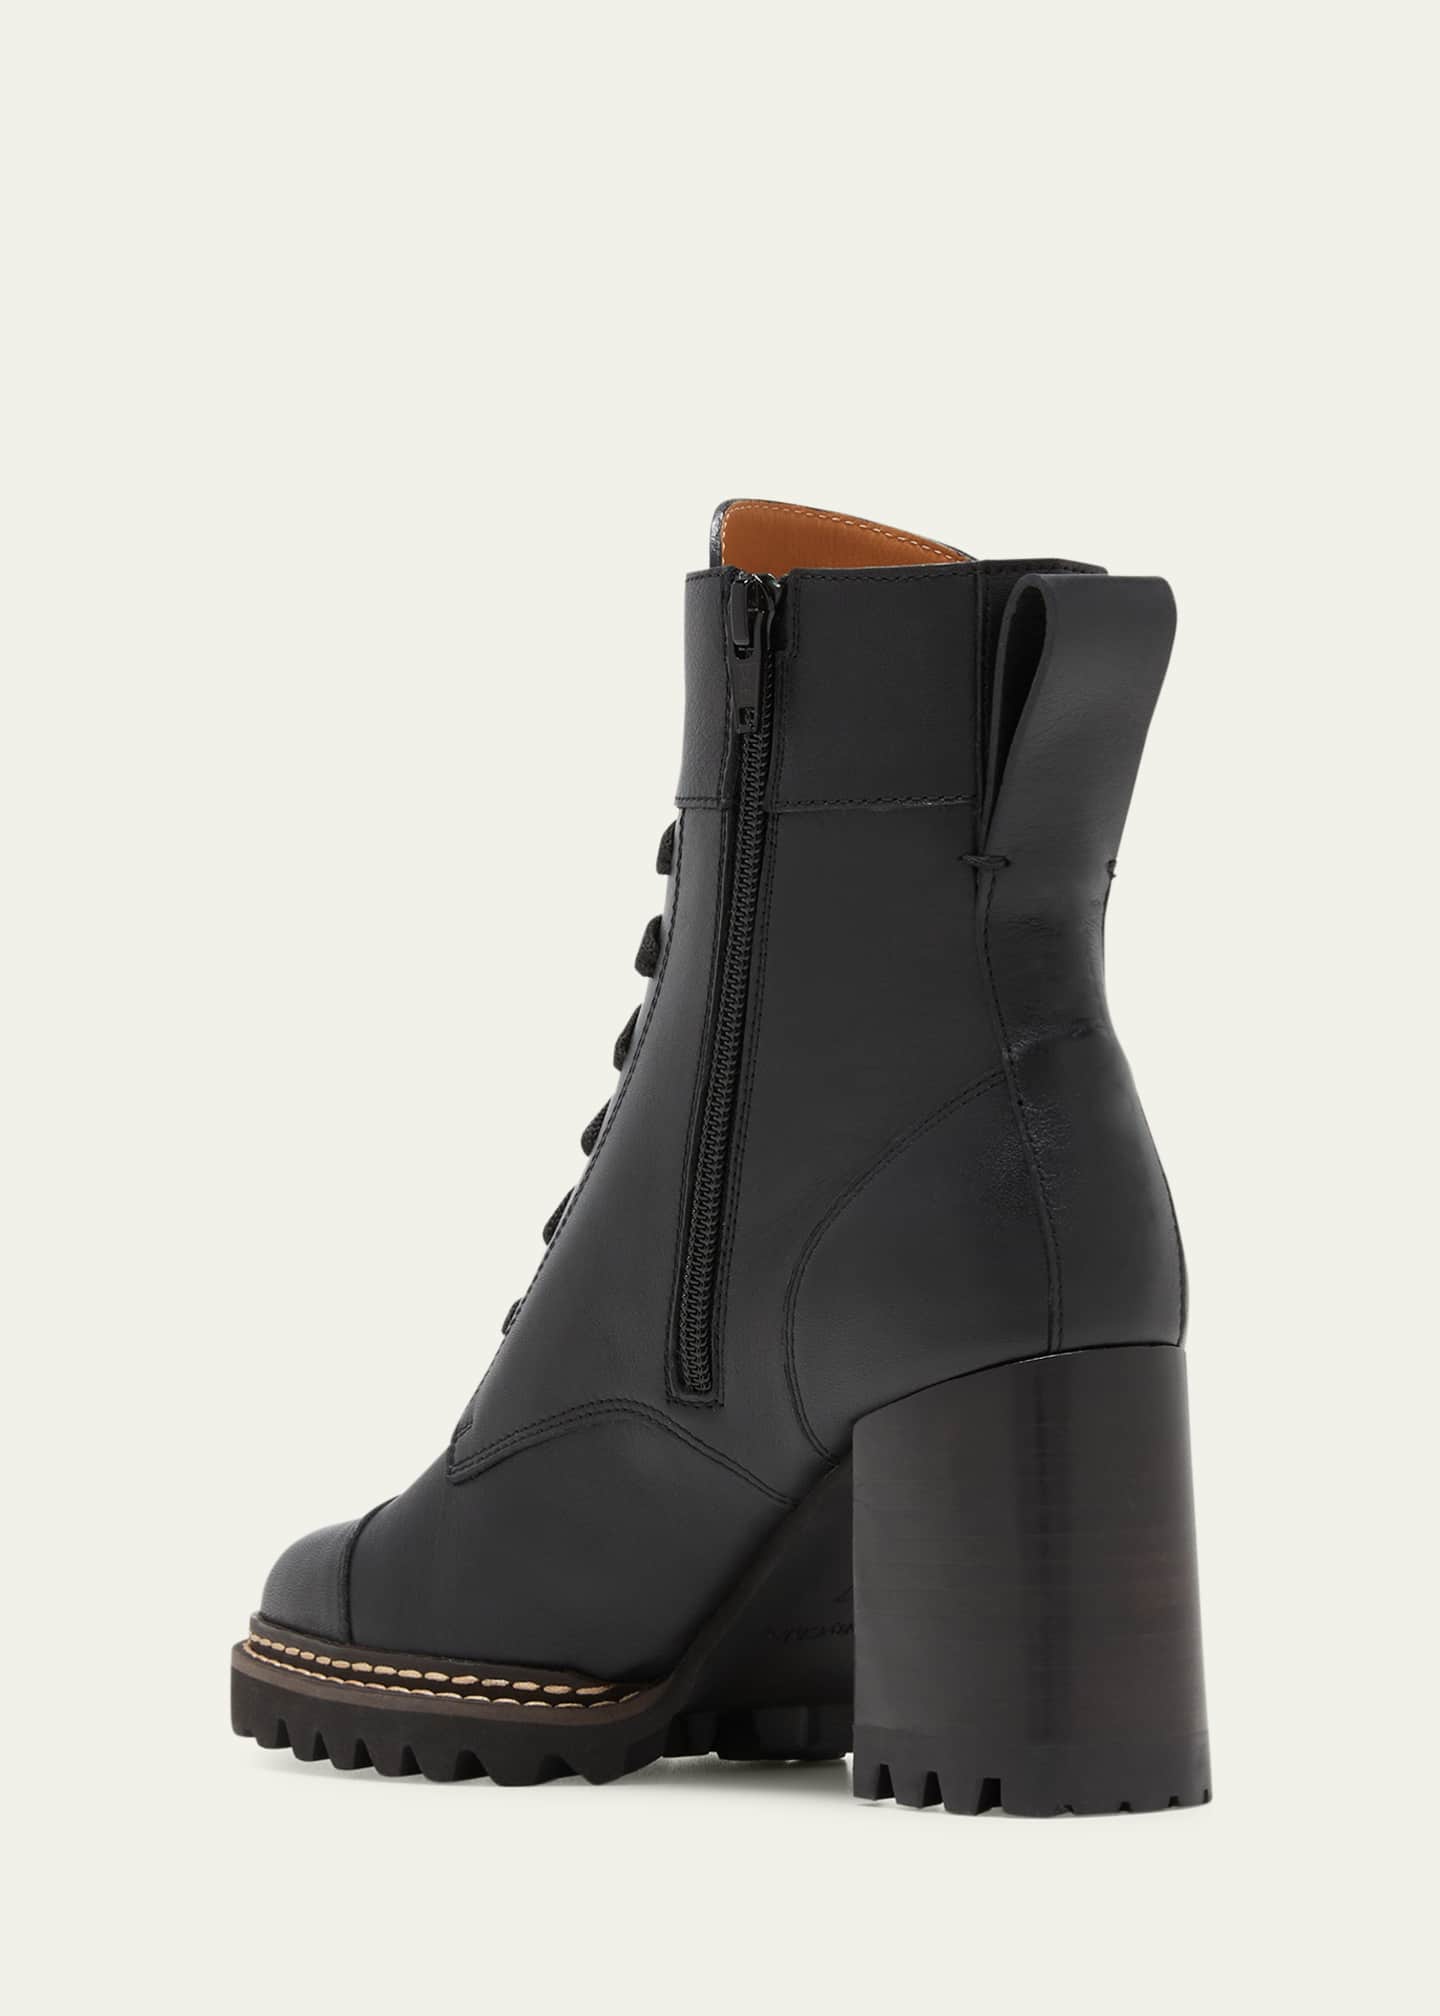 See by Chloe Mallory Buckle Combat Boots - Bergdorf Goodman